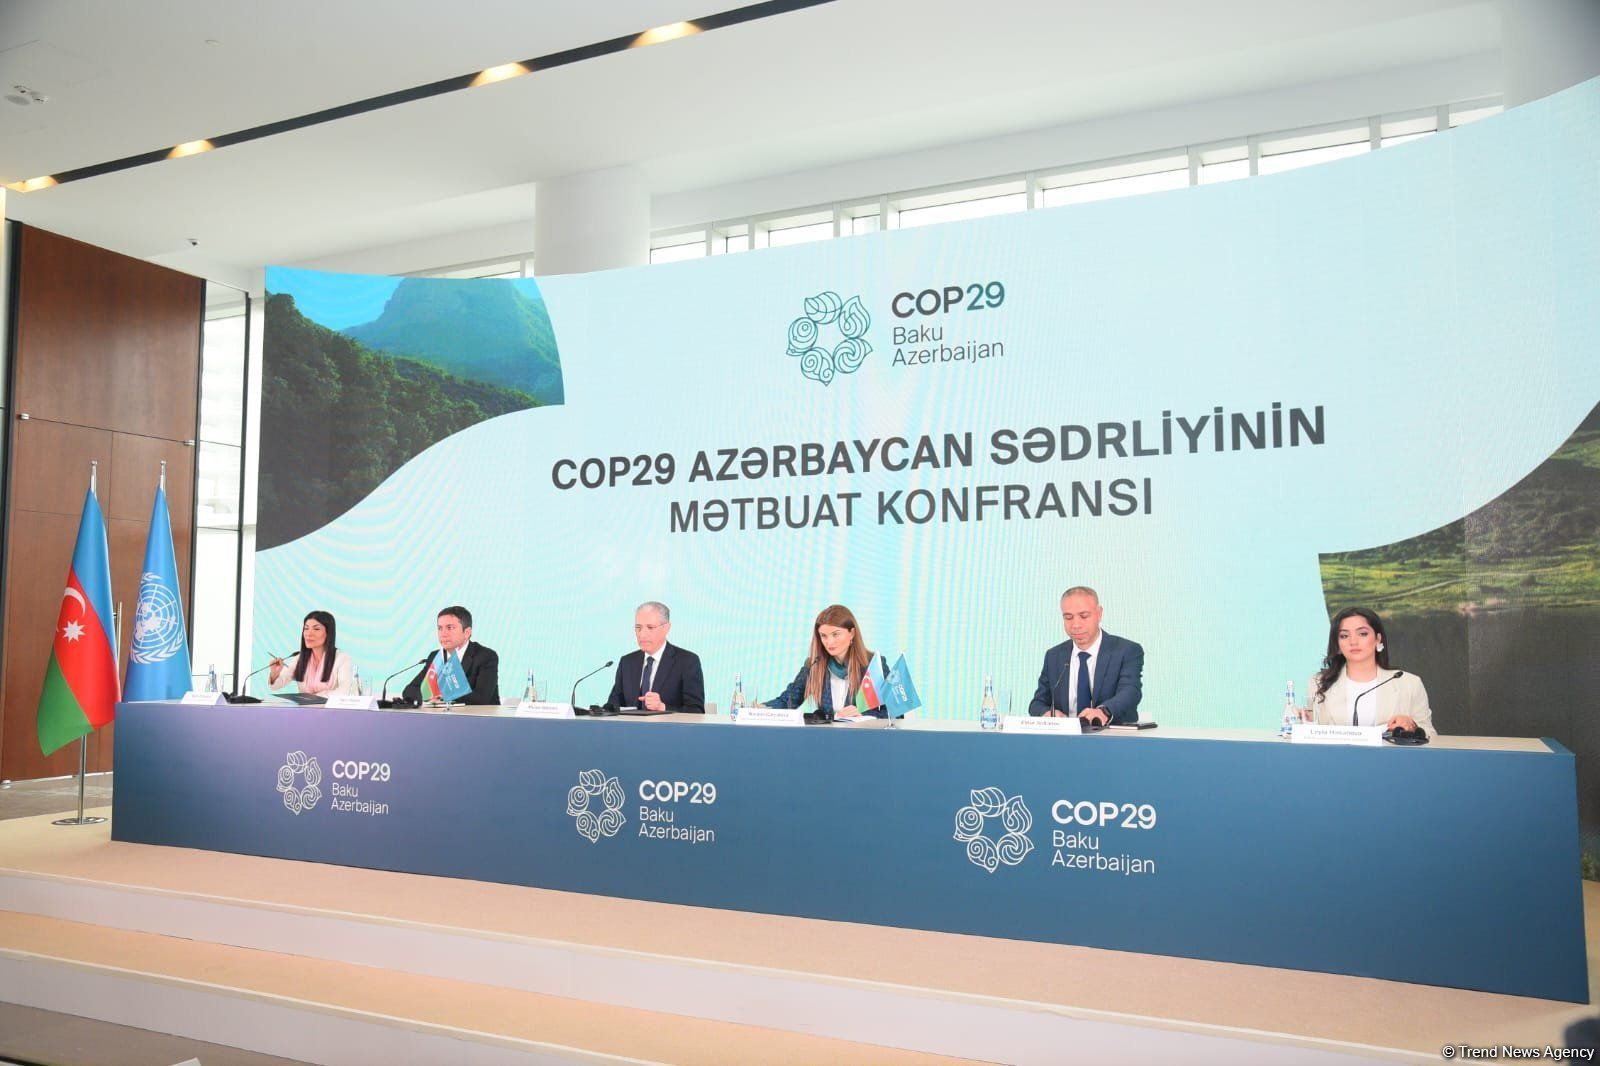 COP29 Presidency hosts inaugural press conference